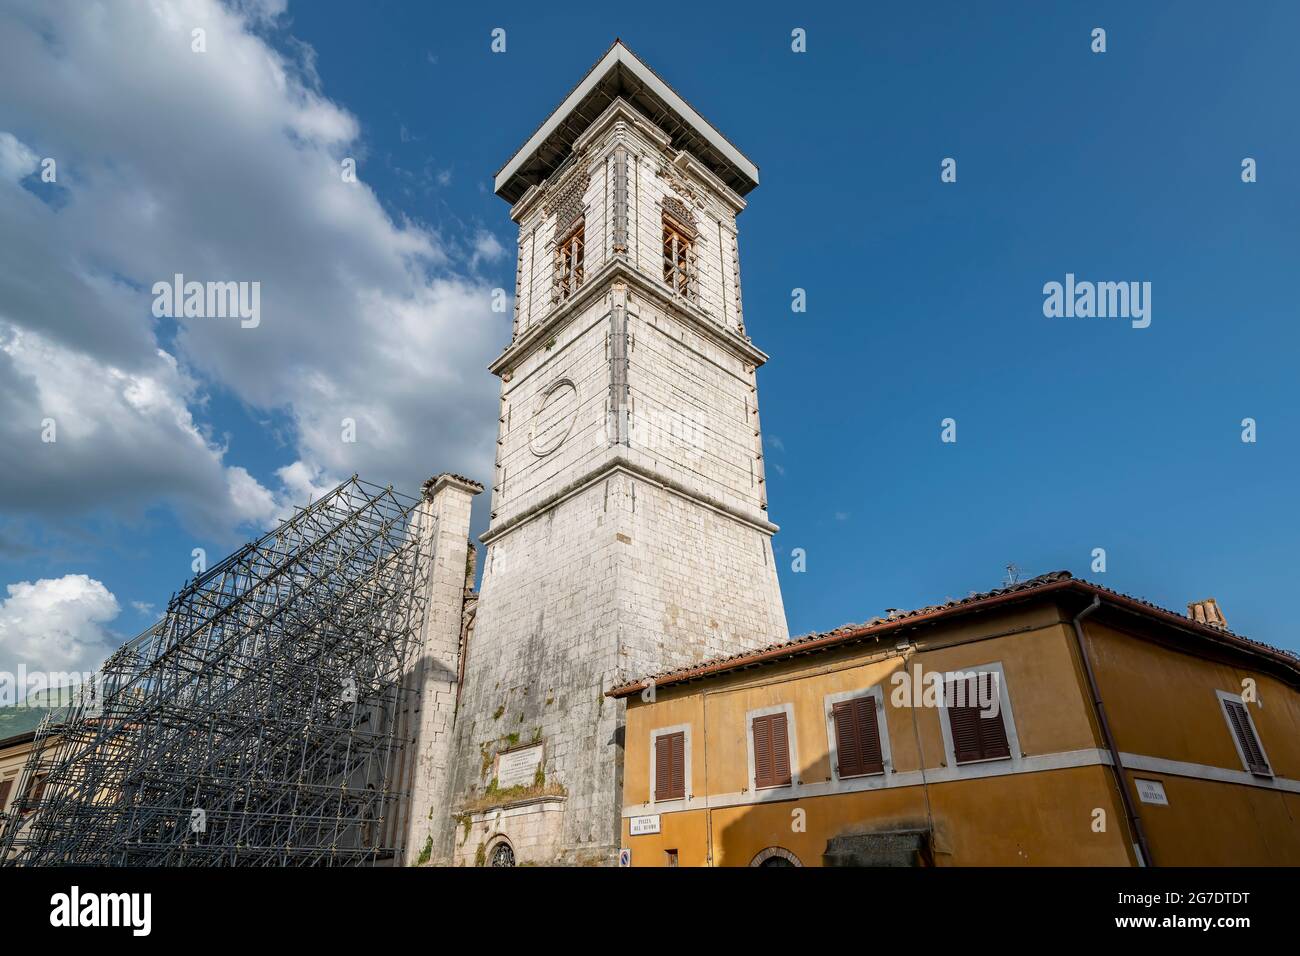 The bell tower and the Cathedral of Norcia, Italy, hit hard by the 2016 earthquake, on a sunny day Stock Photo